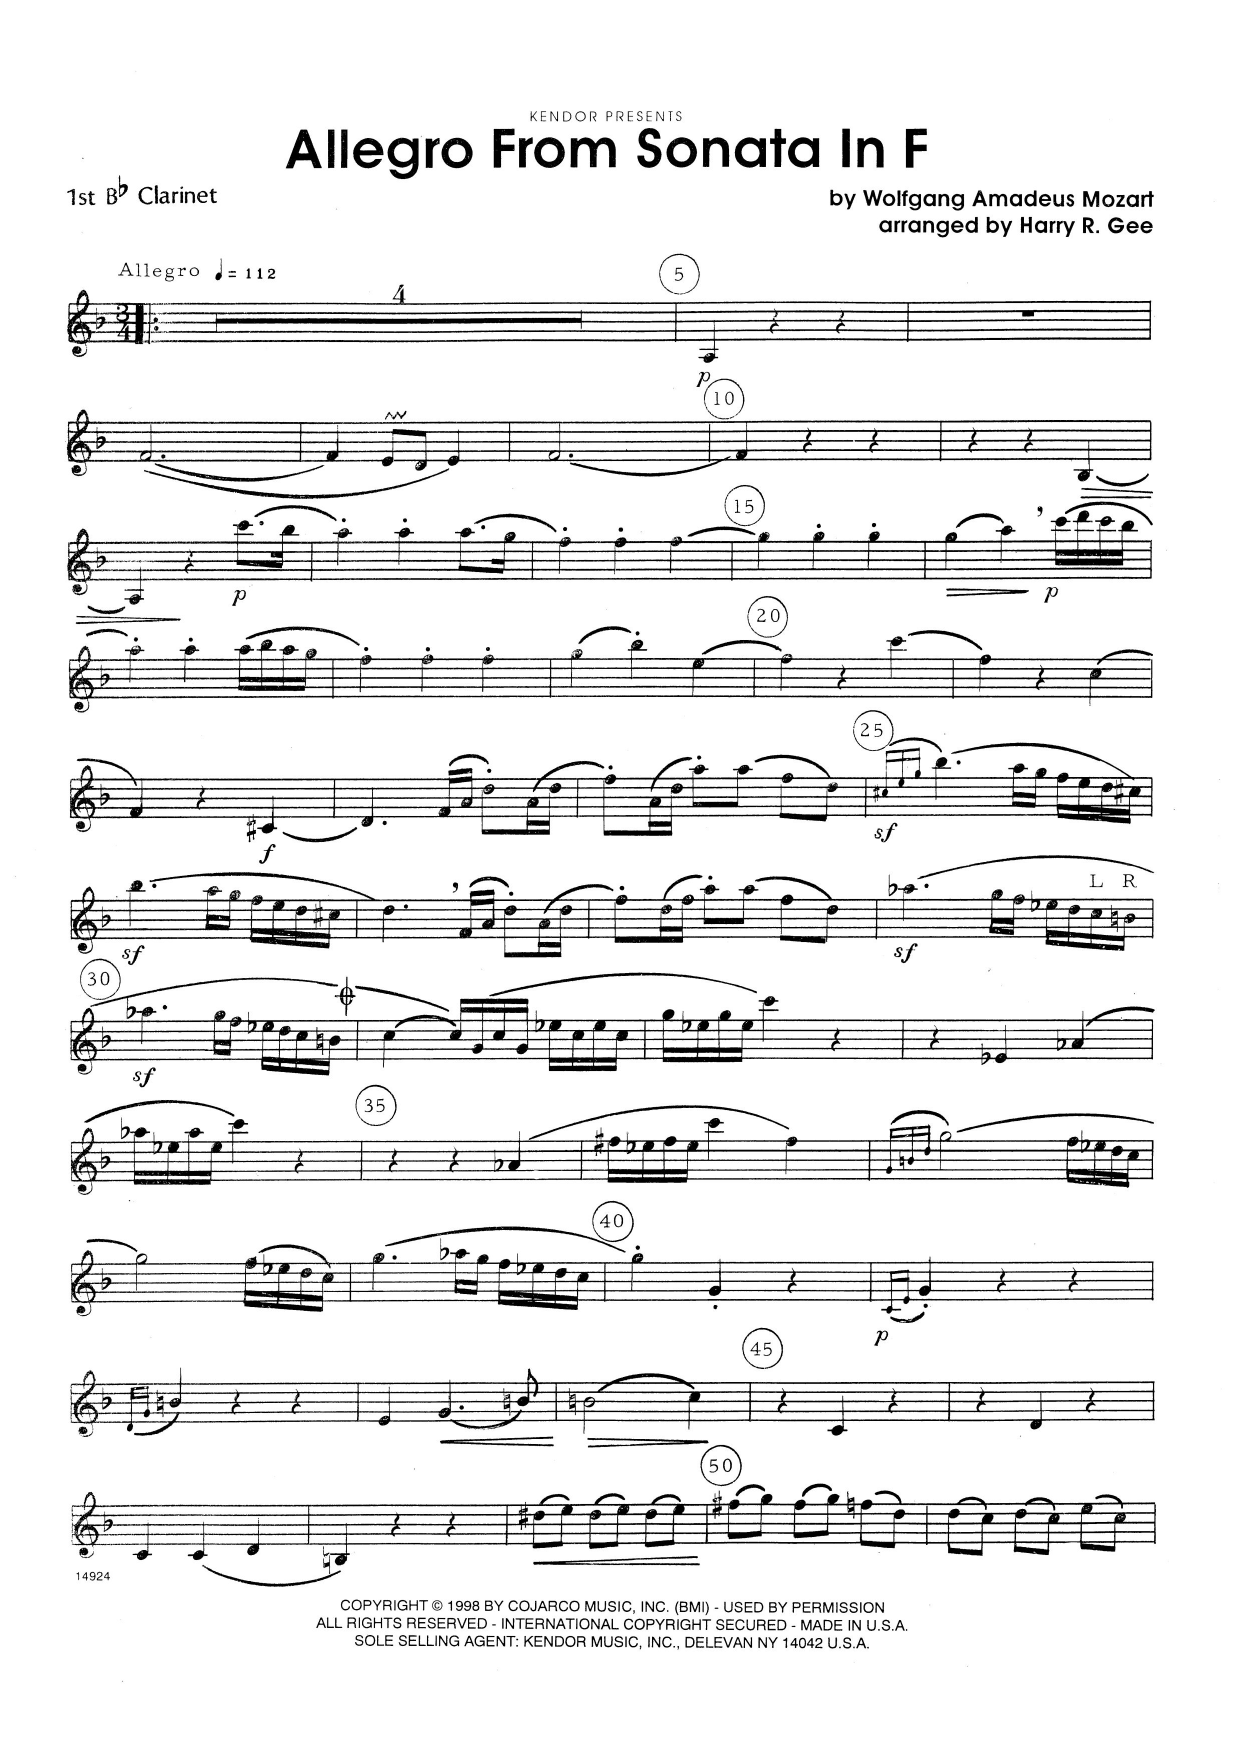 Download Harry Gee Allegro From Sonata In F - 1st Bb Clari Sheet Music